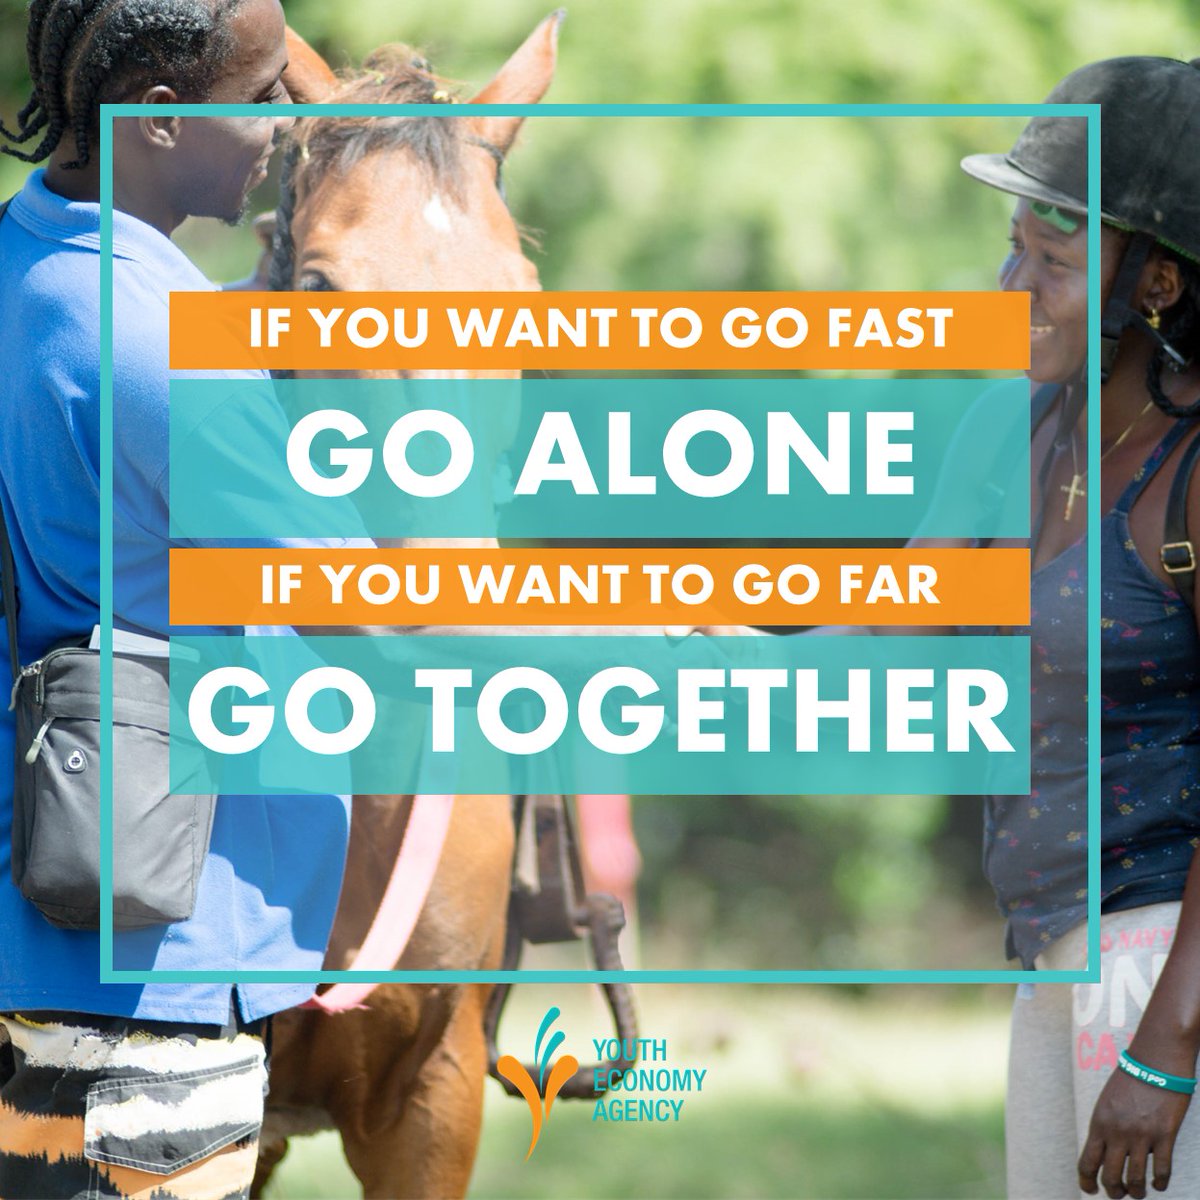 'If you want to go fast, go alone. If you want to go far, go together.'

'Many hands make light work.'

We can build a better tomorrow if we just start by supporting one another today. Let's get it!

#YEA #YouthDevelopment #YoungEntrepreneurs #YouthEconomy #YeaYea